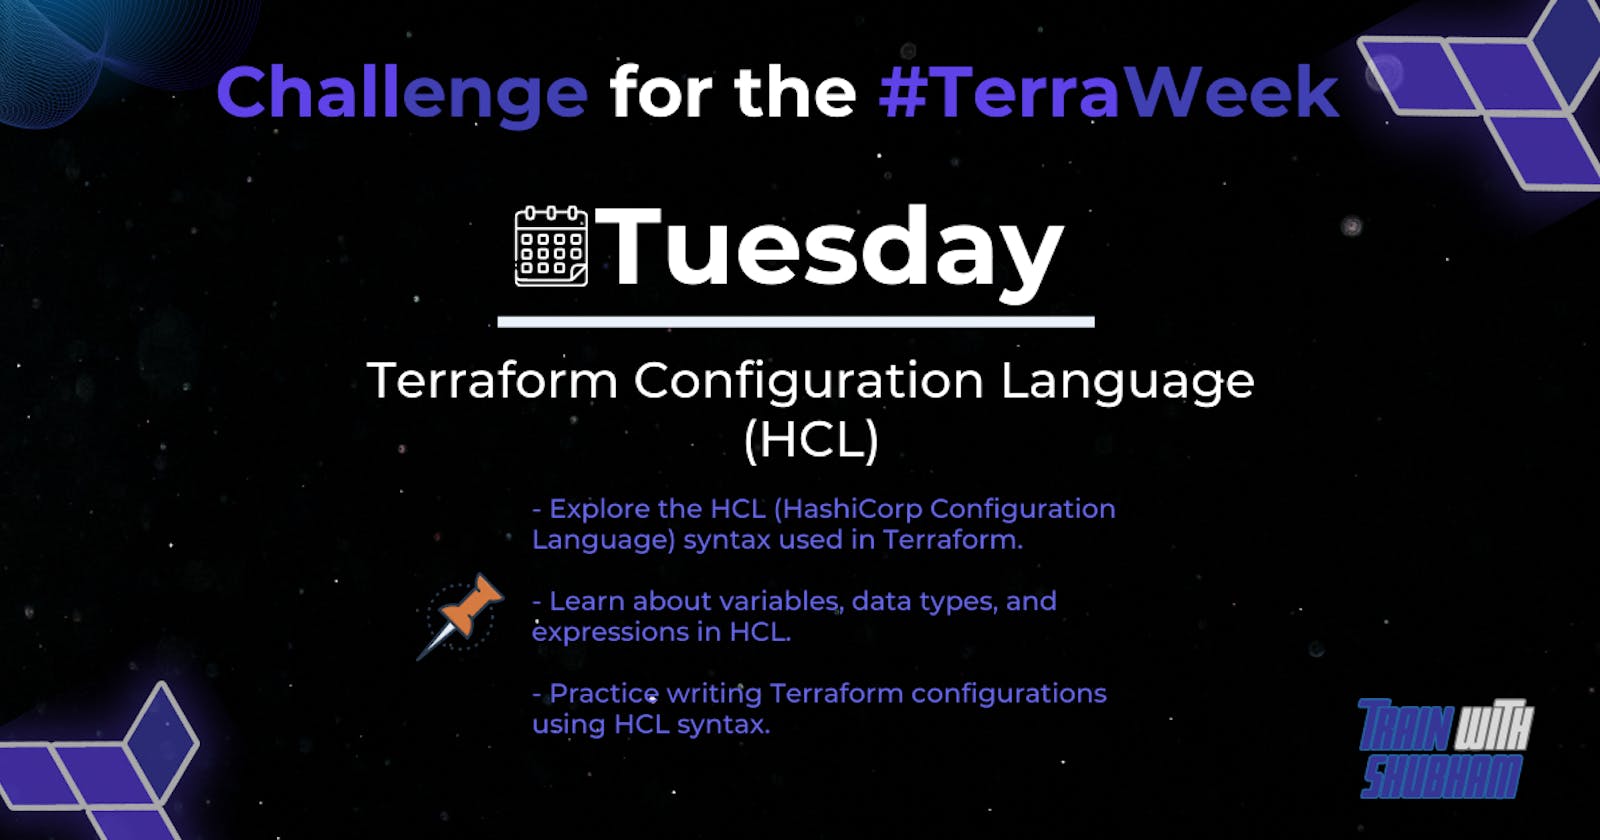 Challenge for the #TerraWeek - Tuesday